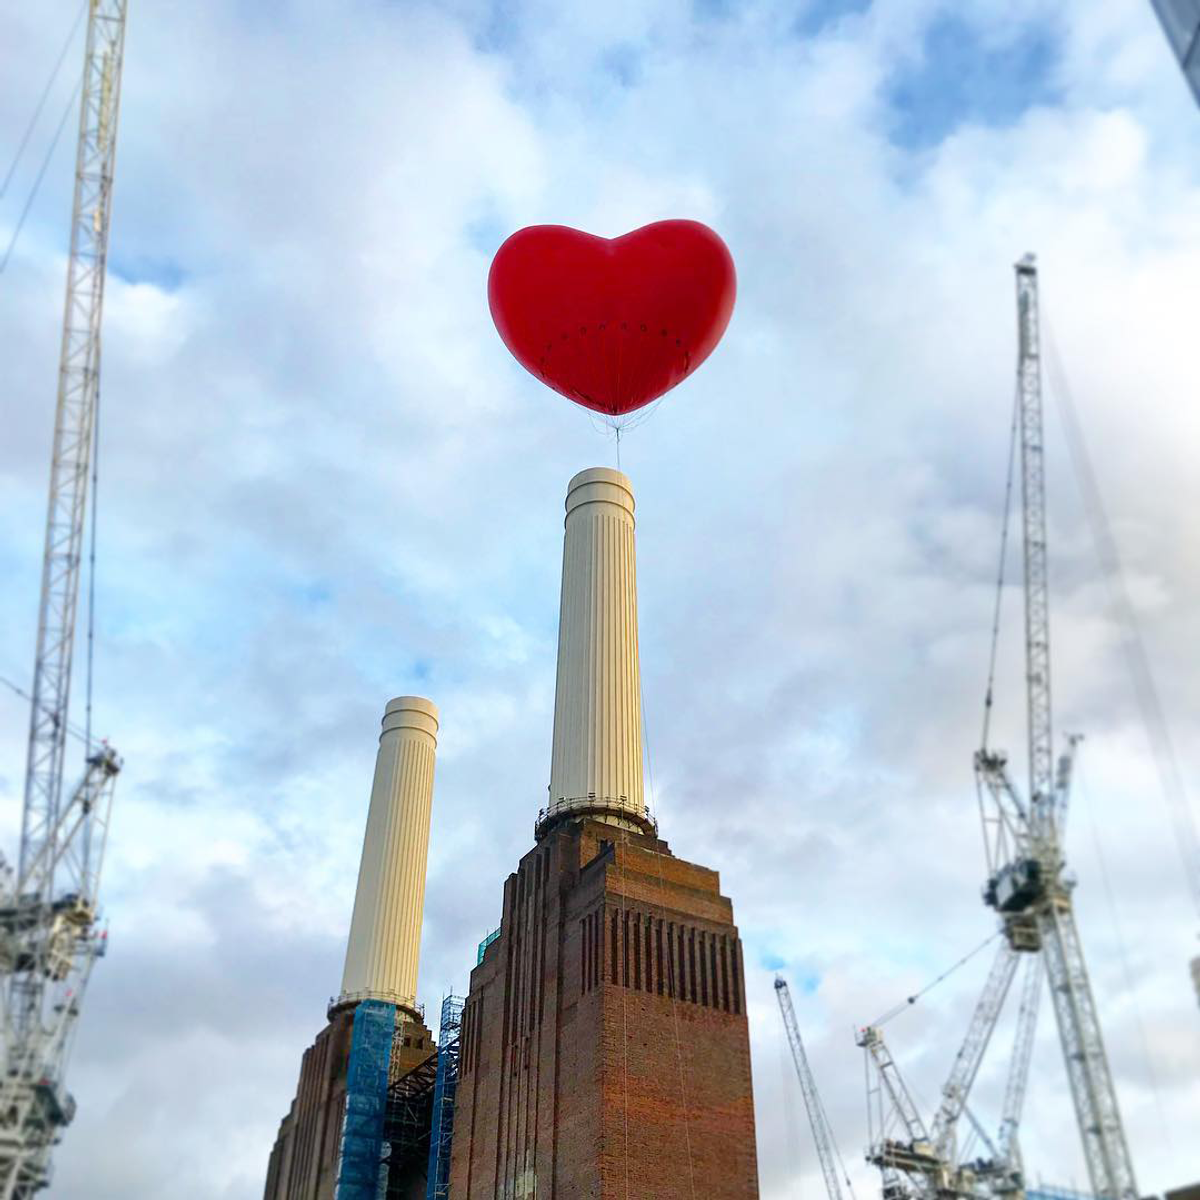 Battersea Power Station is one of many venues for the Chubby Hearts Juliet Waud / @jcvwaud